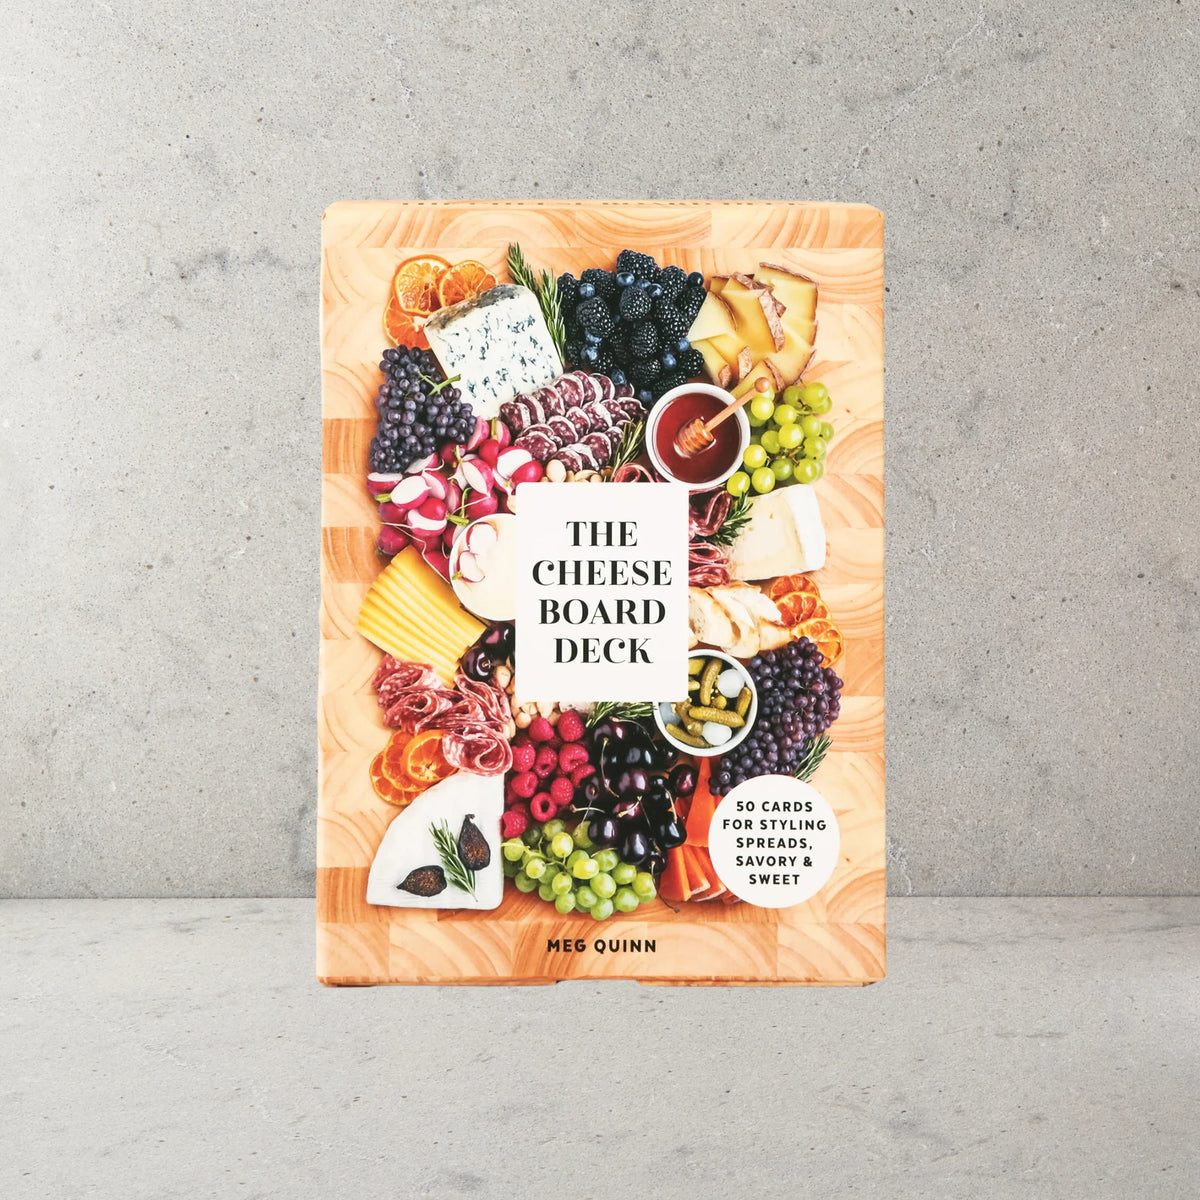 The Cheese Board Deck by Meg Quinn. 50 Cards for styling platters, savory and sweet.